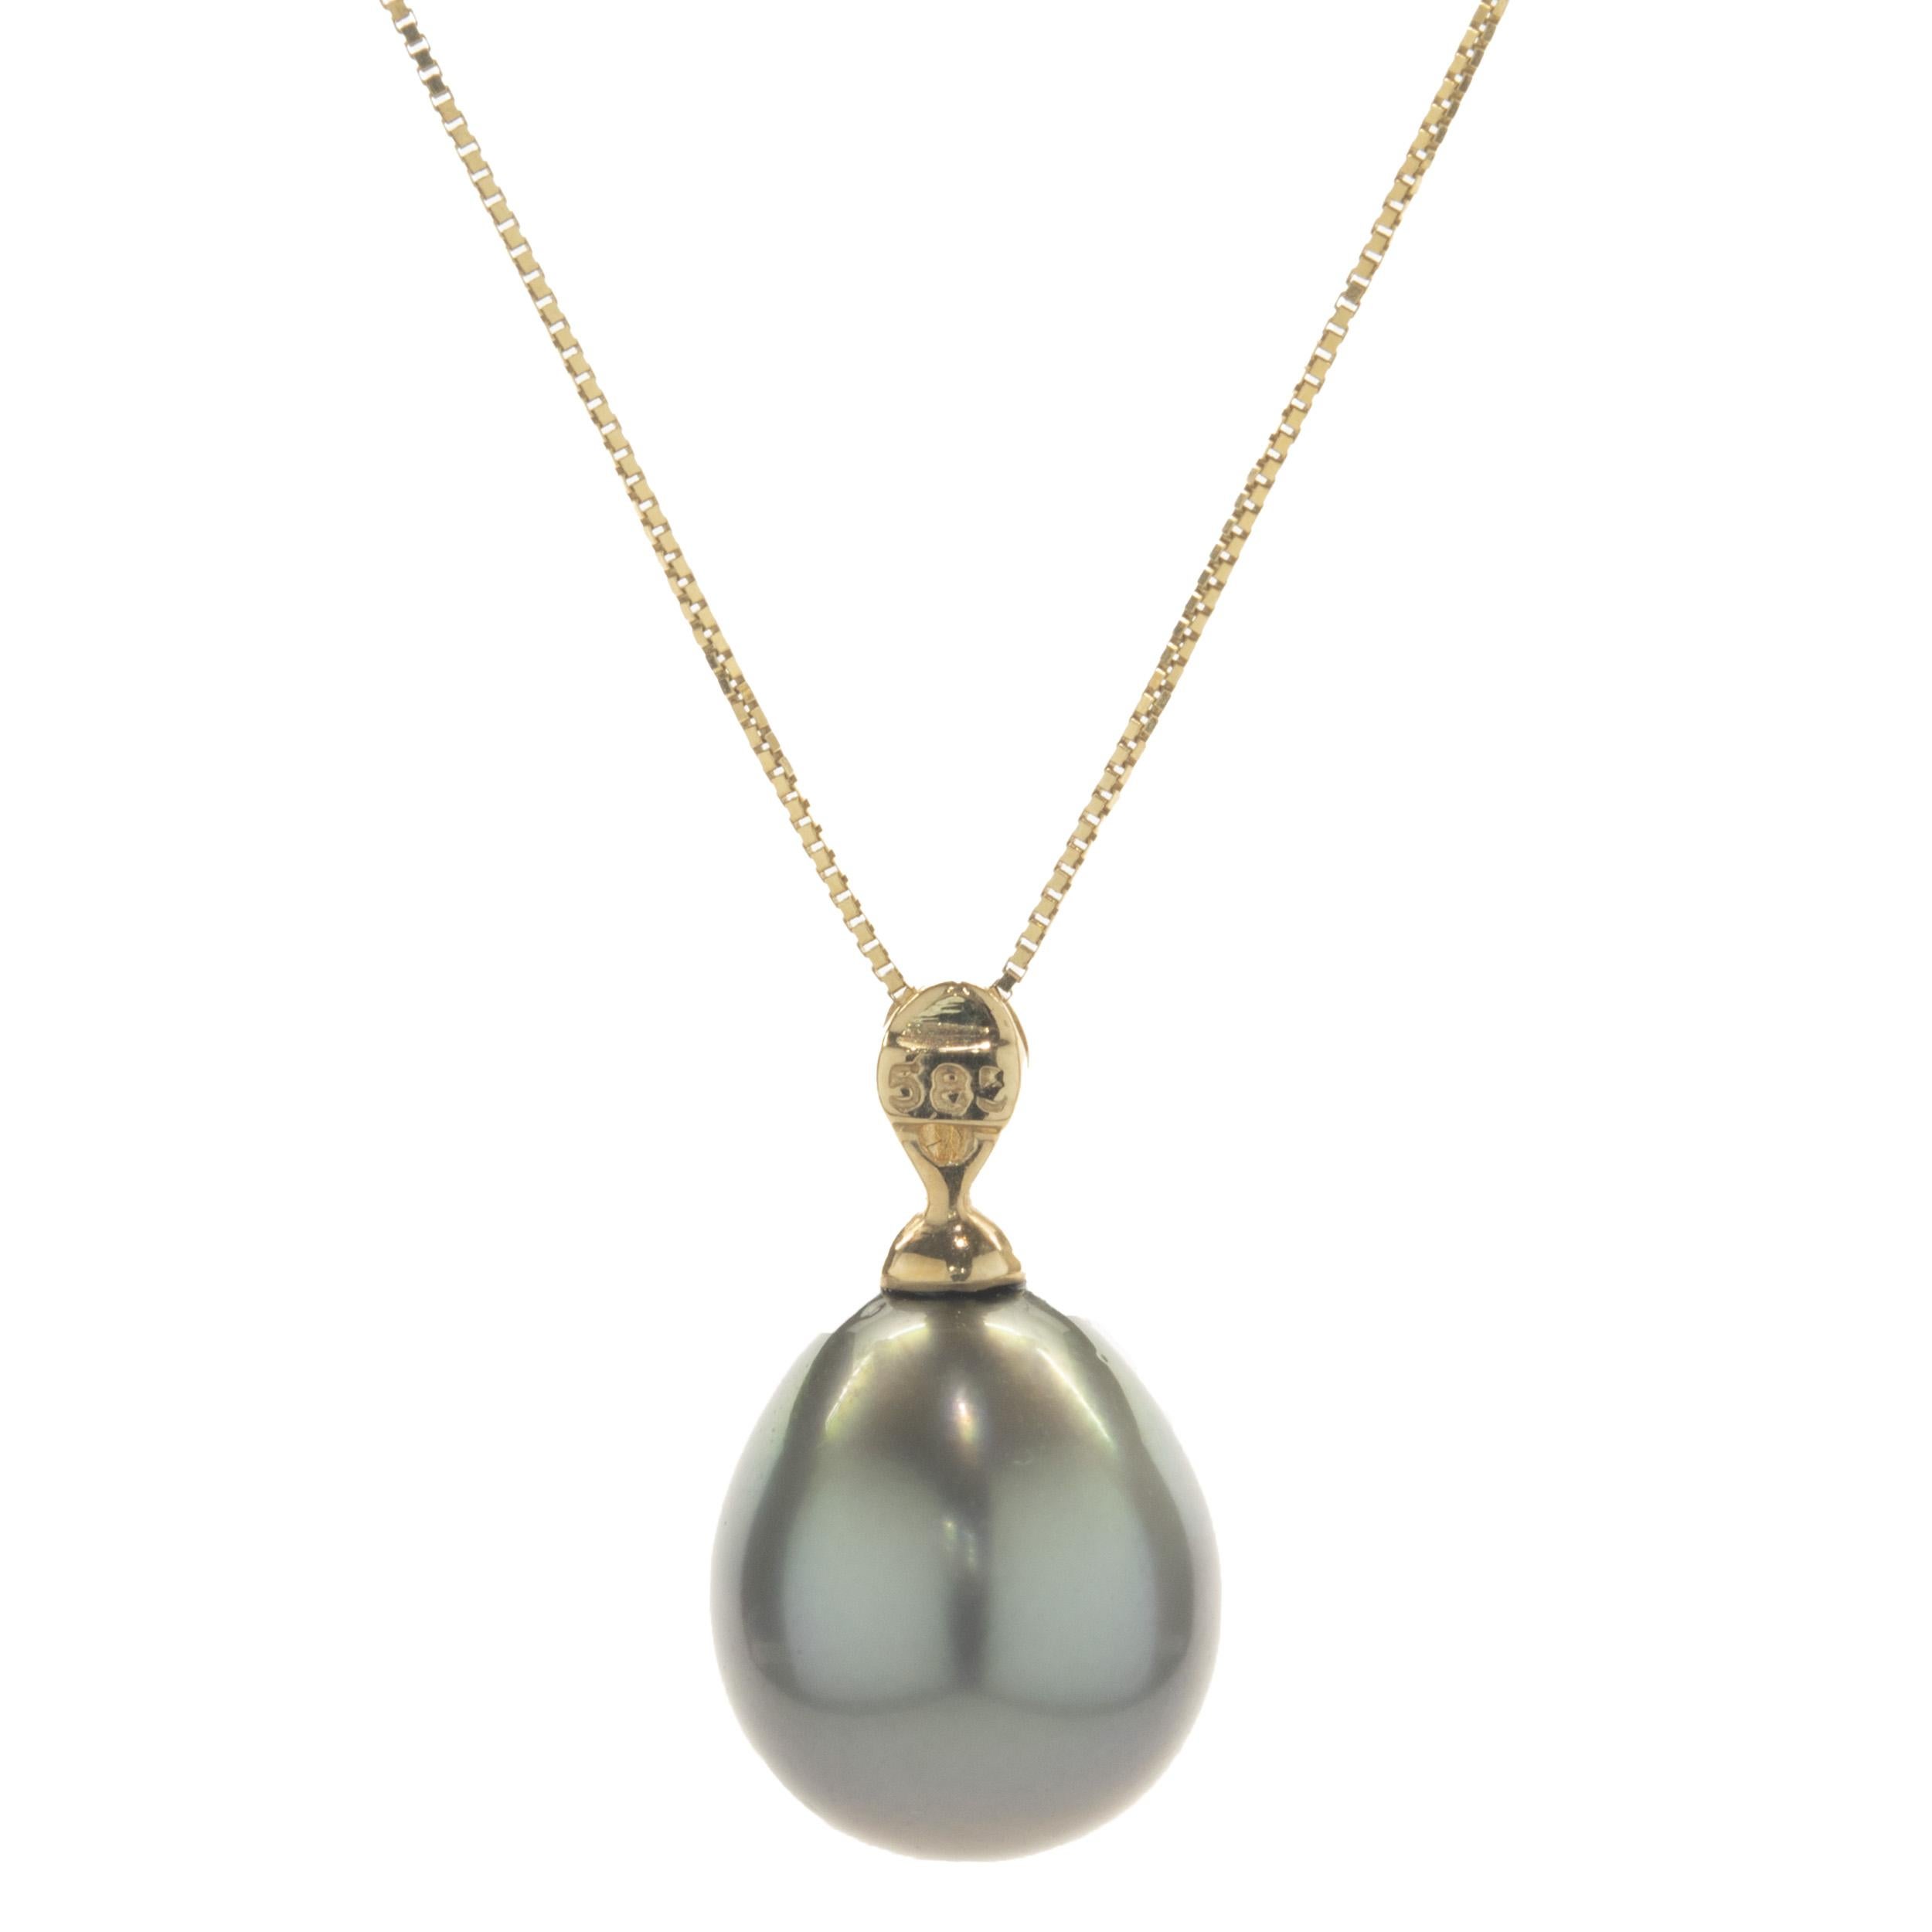 Designer: custom
Material: 14K yellow gold 
Weight: 3.11 grams
Dimensions: necklace measures 18-inches
